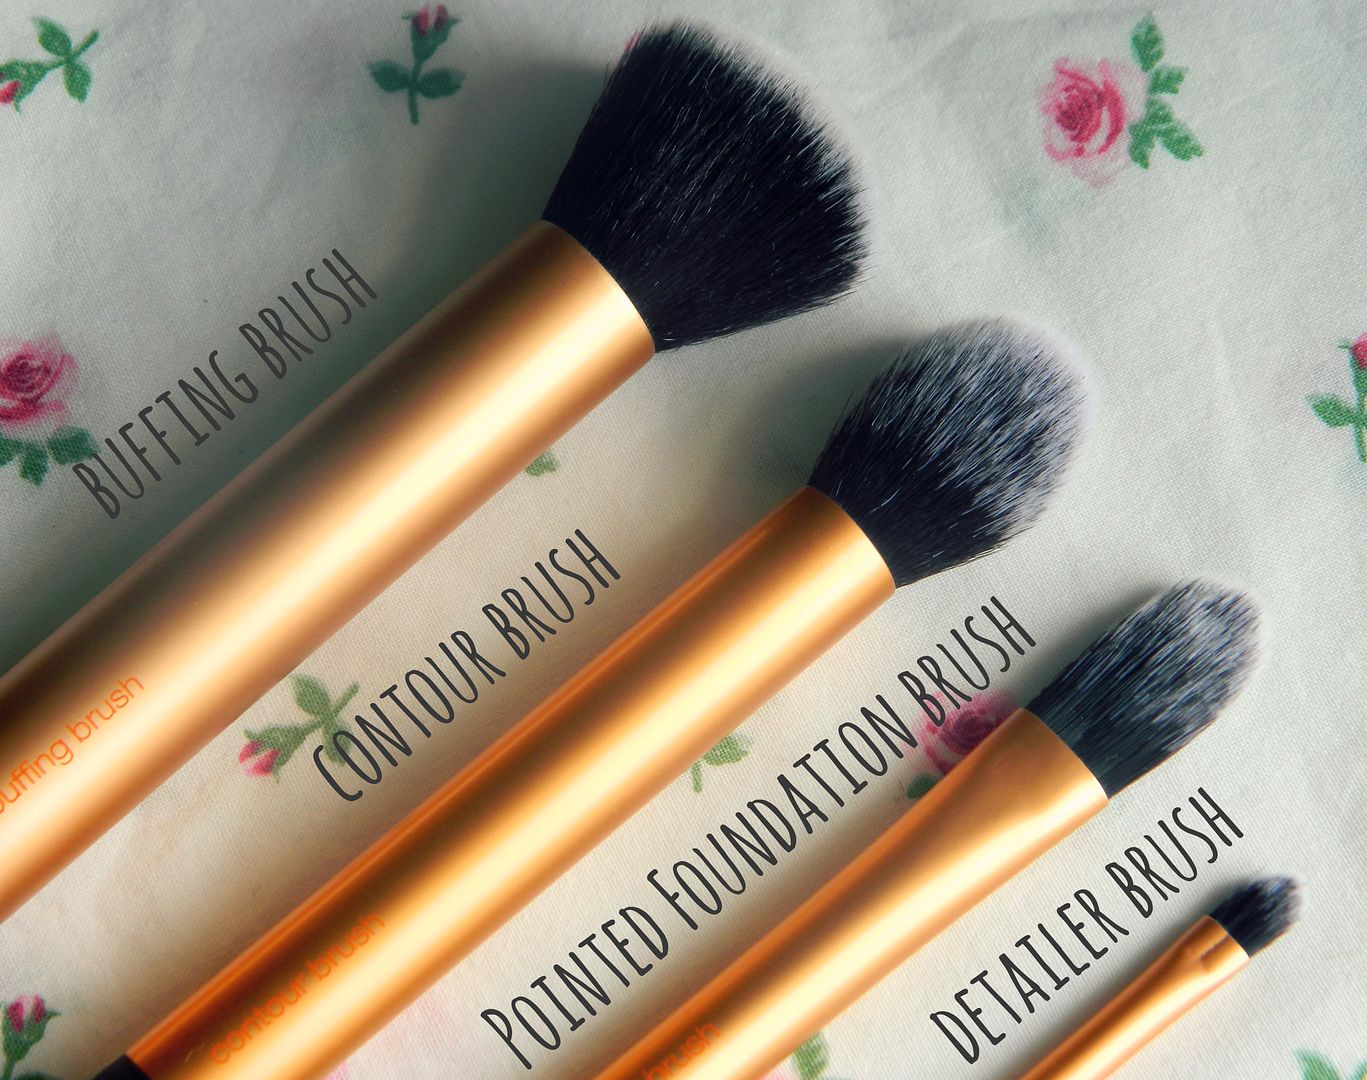 Real Techniques Makeup Brush Collection Core Collection Brushes Review Belle-amie UK Beauty Fashion Lifestyle Blog